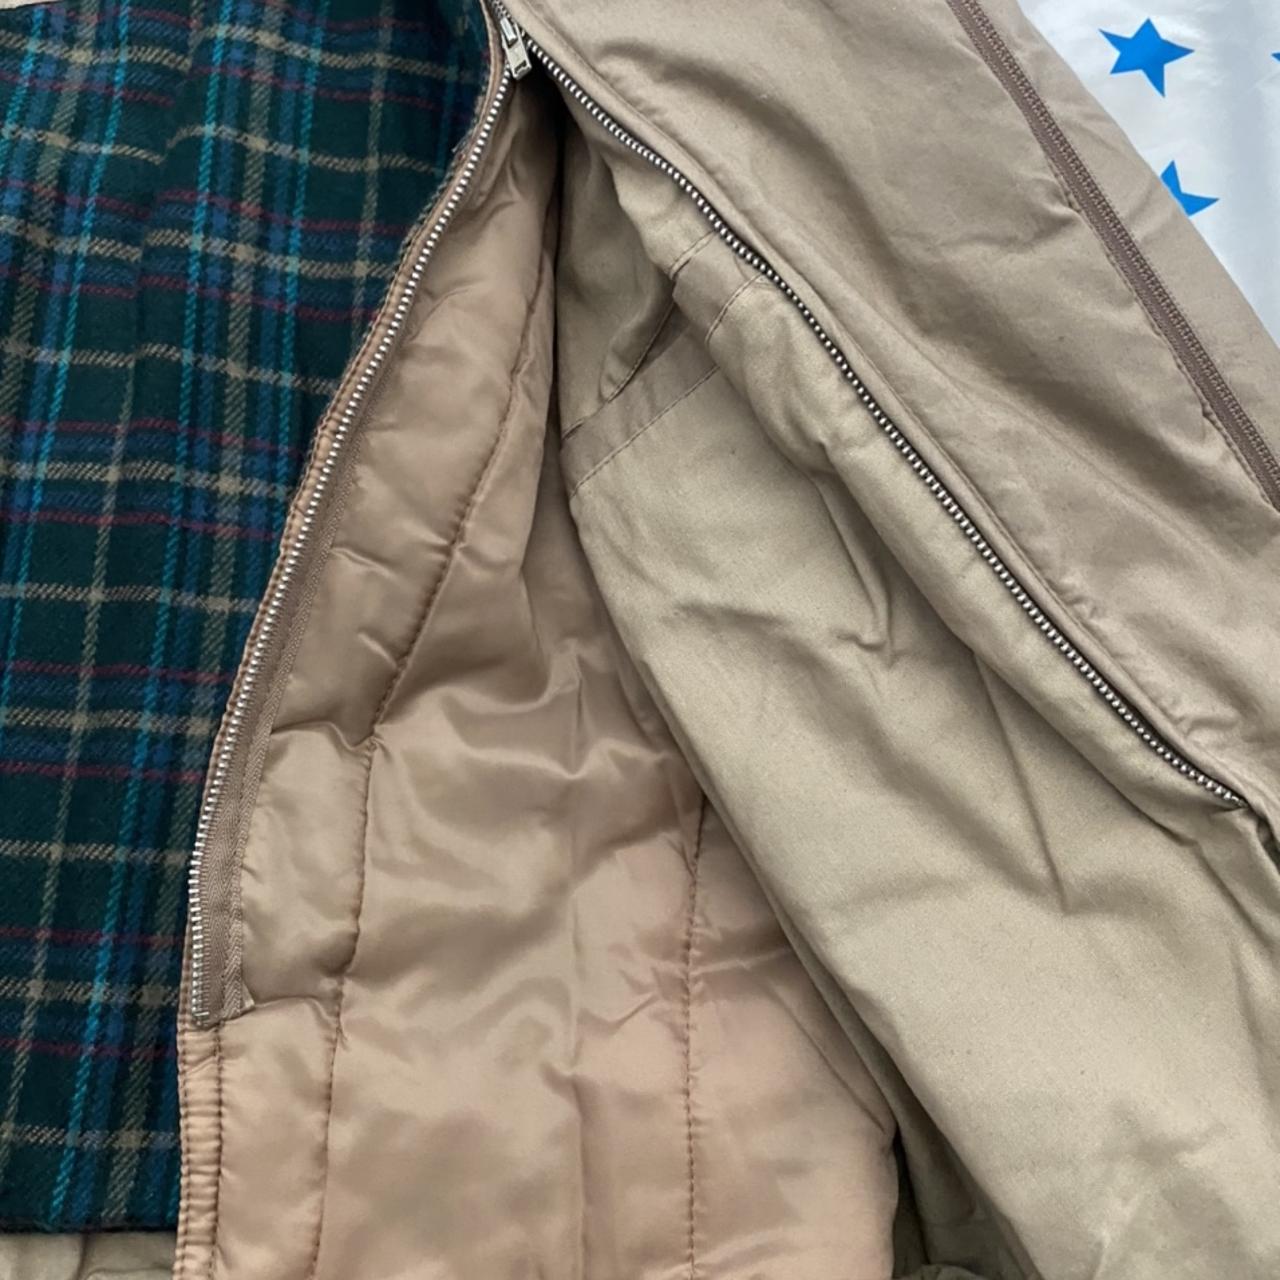 Members Only Men's Tan and Green Jacket (4)